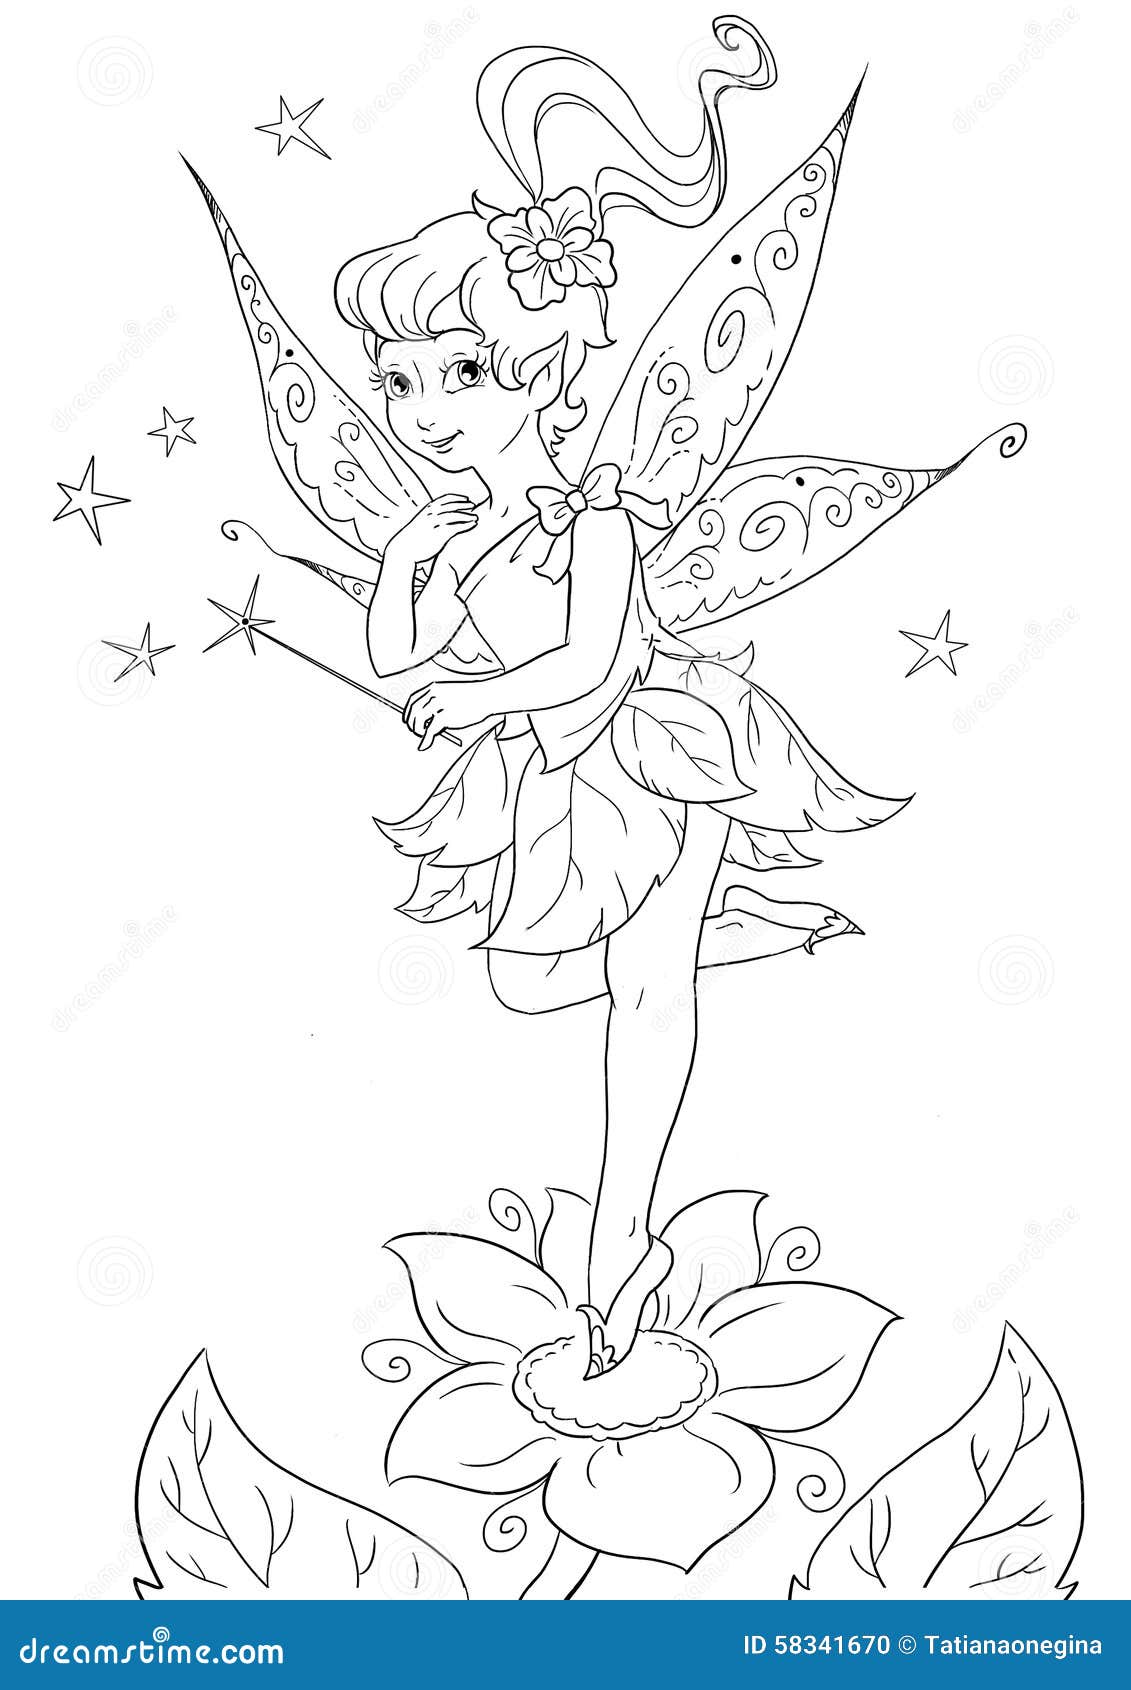 Magic wand coloring page stock illustrations â magic wand coloring page stock illustrations vectors clipart